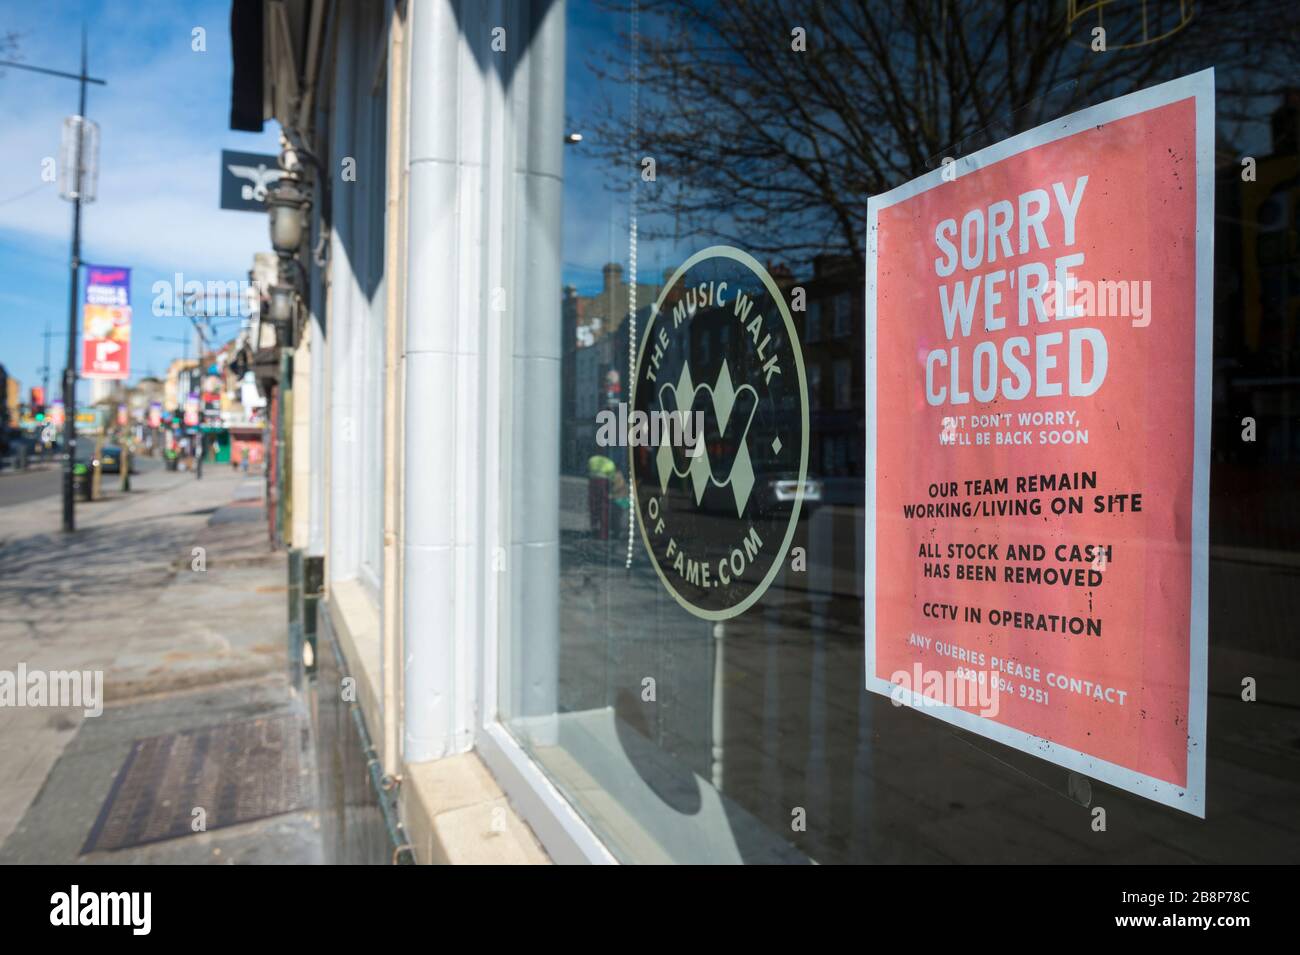 LONDON - MARCH 22, 2020: A sign on a pub on the Music Walk of Fame in Camden Town with empty streets indicates the recent closure due to Coronavirus. Stock Photo